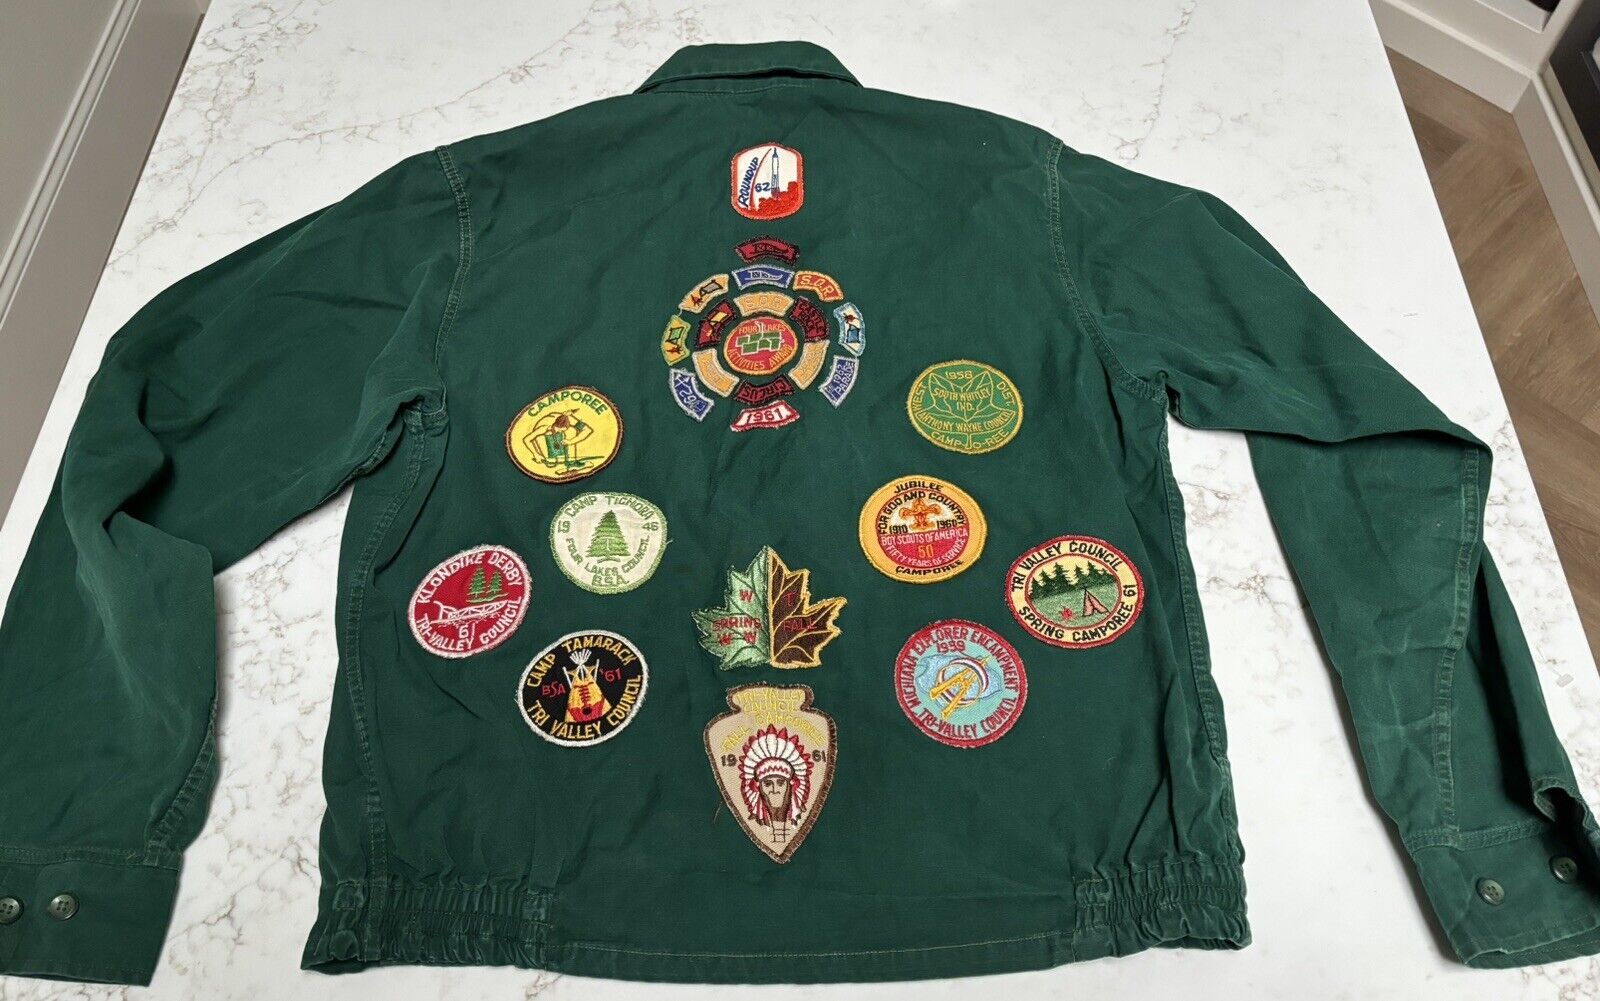 Authentic Vintage Boy Scout Jacket W/ Camp Patches From 1940s-60s